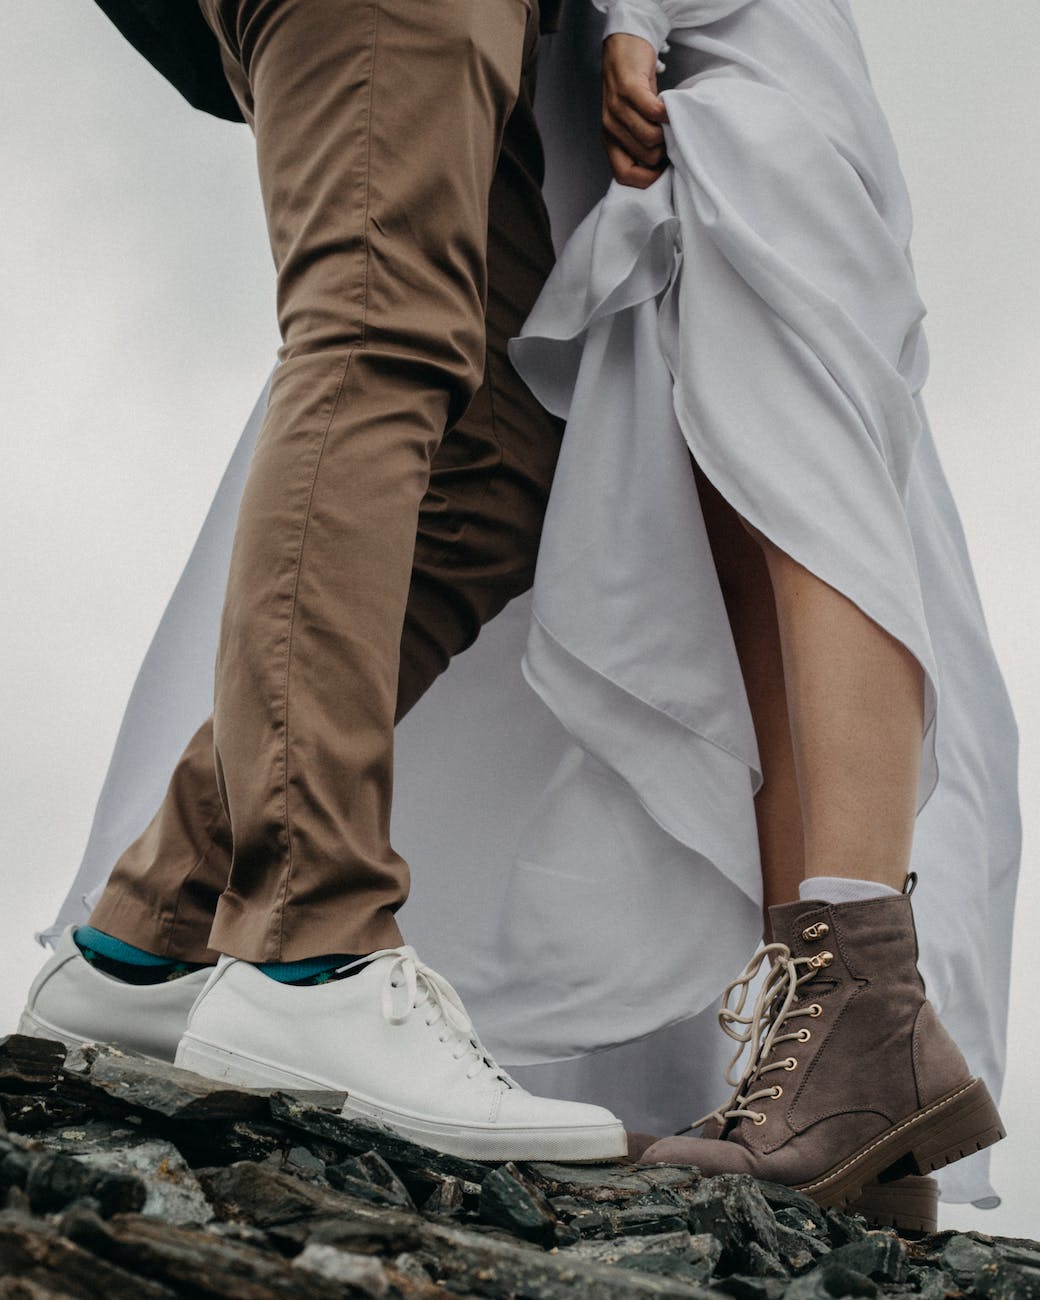 couple in stylish clothes standing on rocky ground